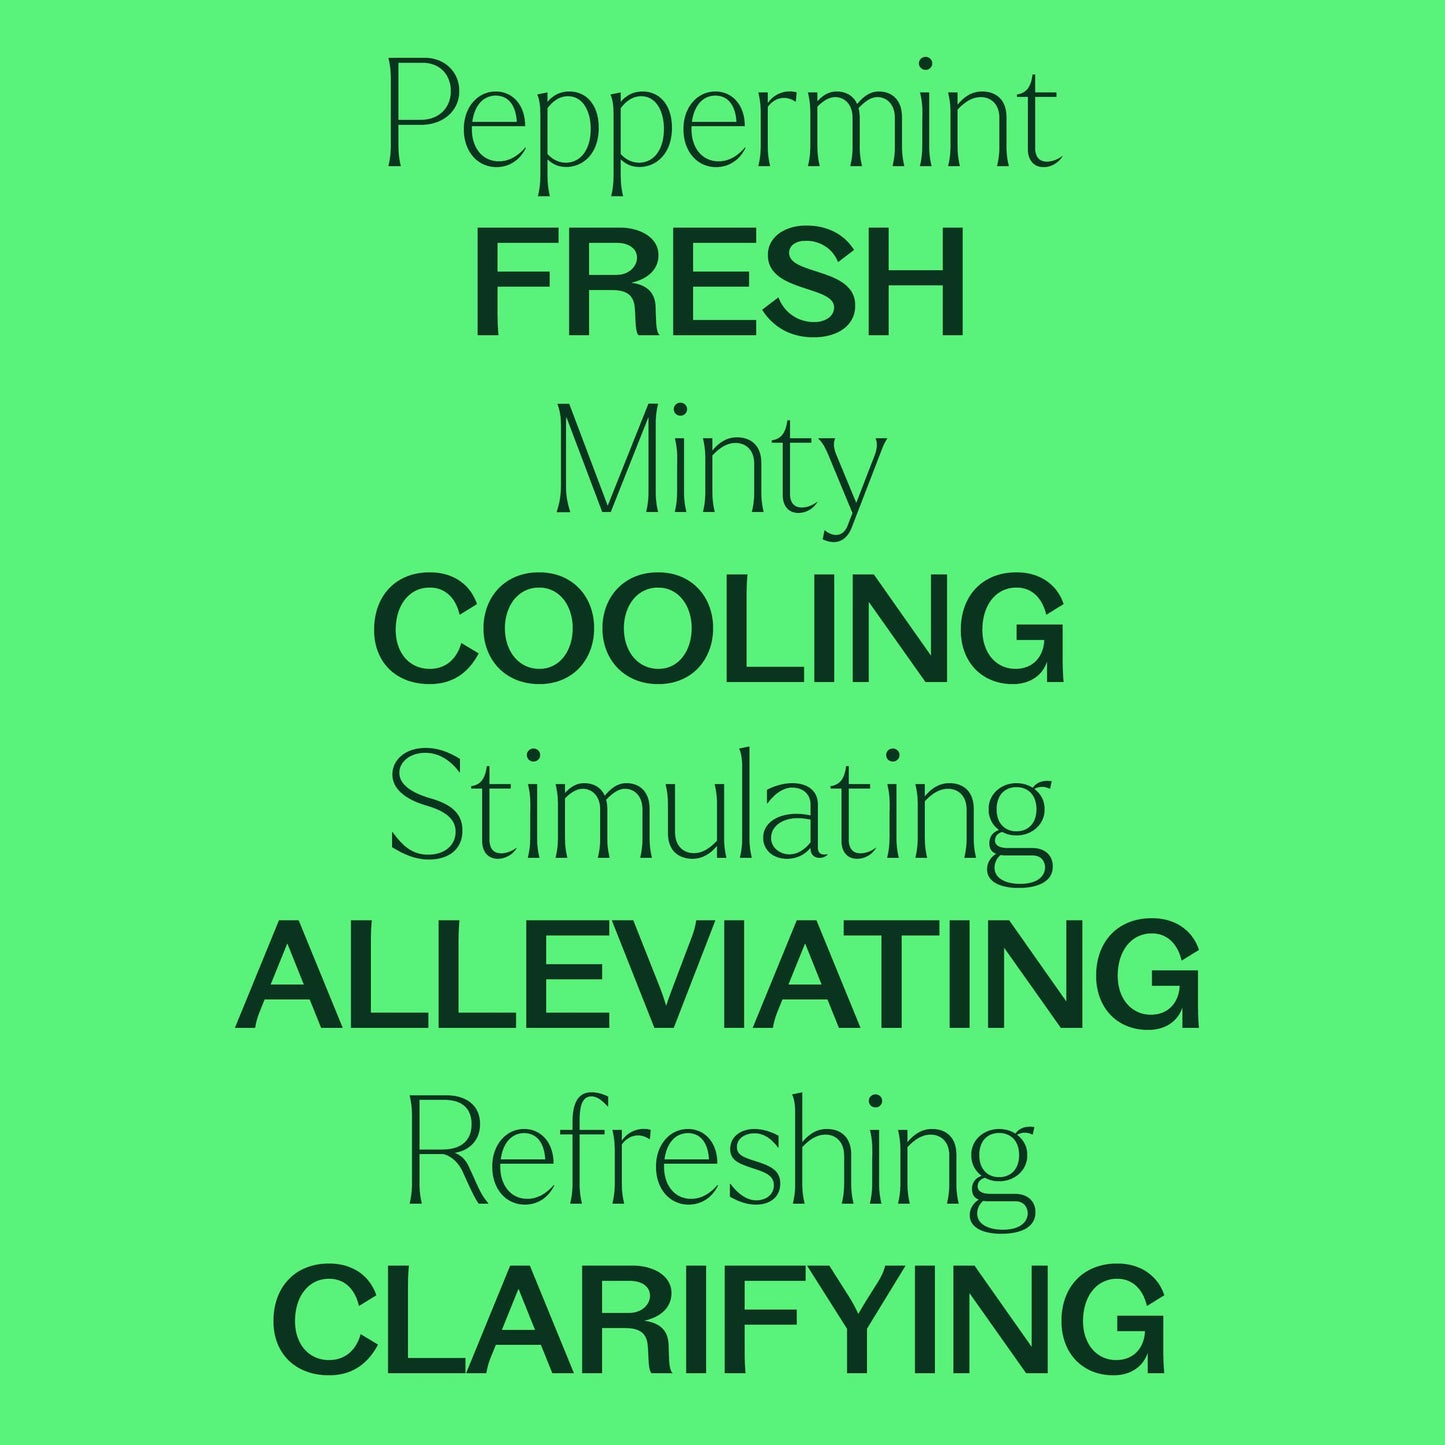 Organic Peppermint Essential Oil is fresh, minty, cooling, stimulating, alleviating, refreshing, clarifying